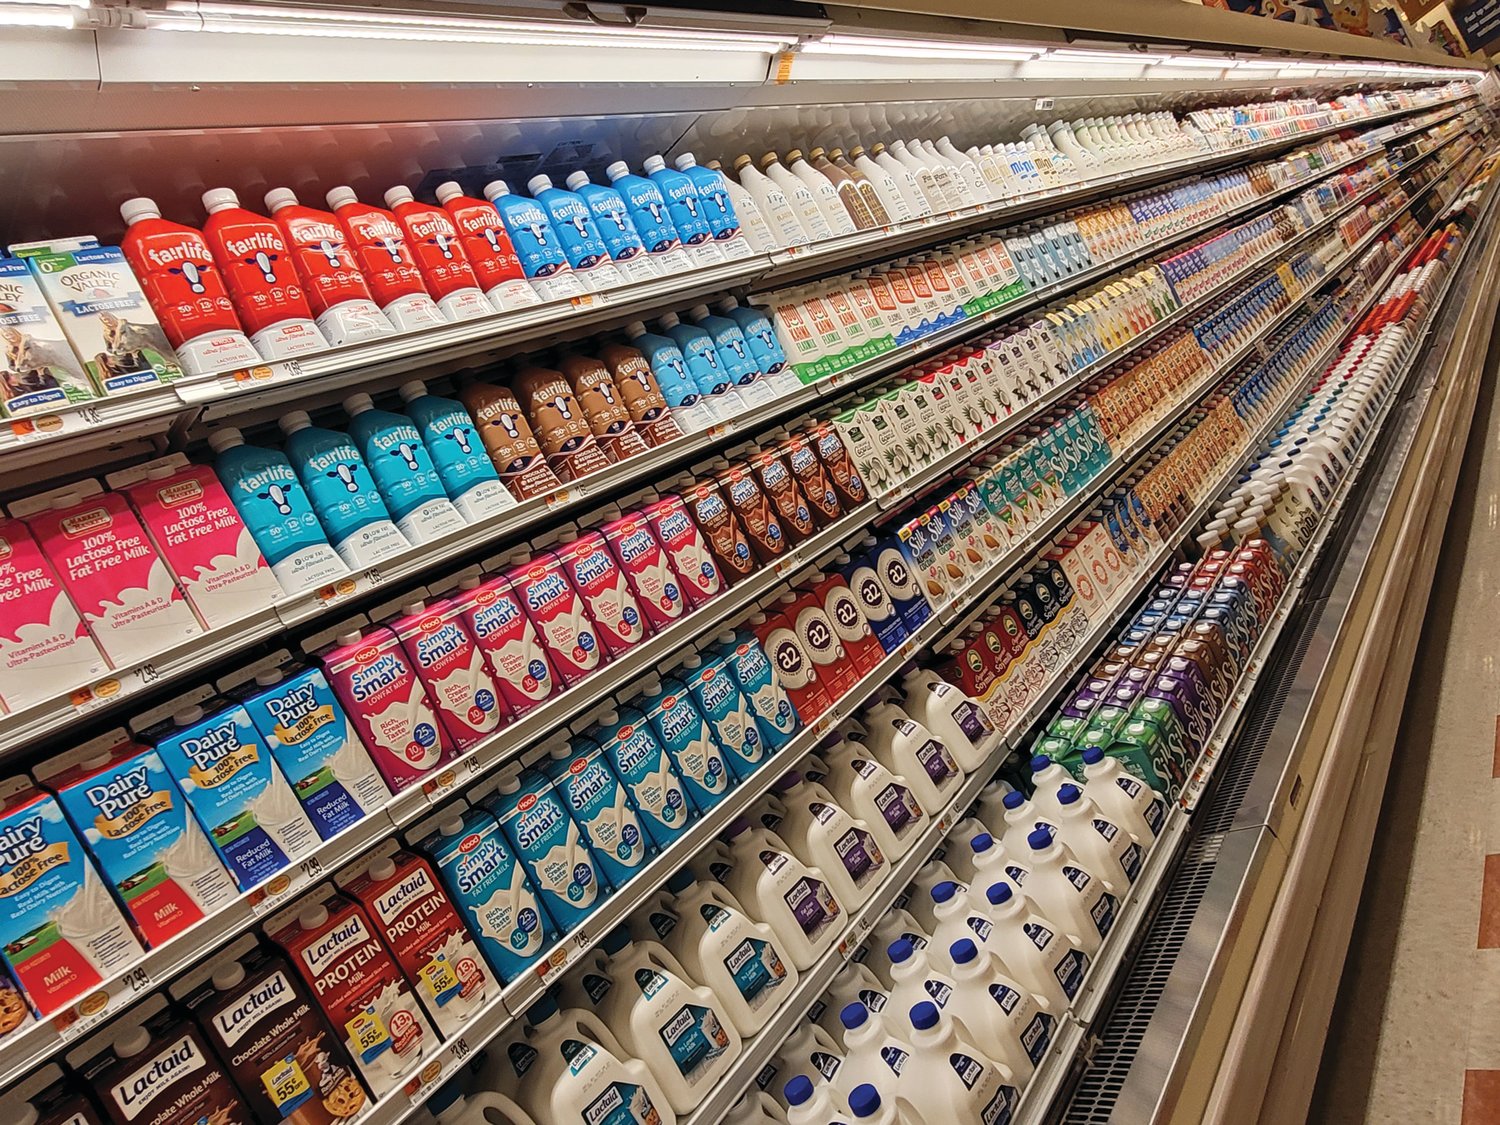 Every shelf is full to the edge with groceries. Who'll be the store's first official customer?